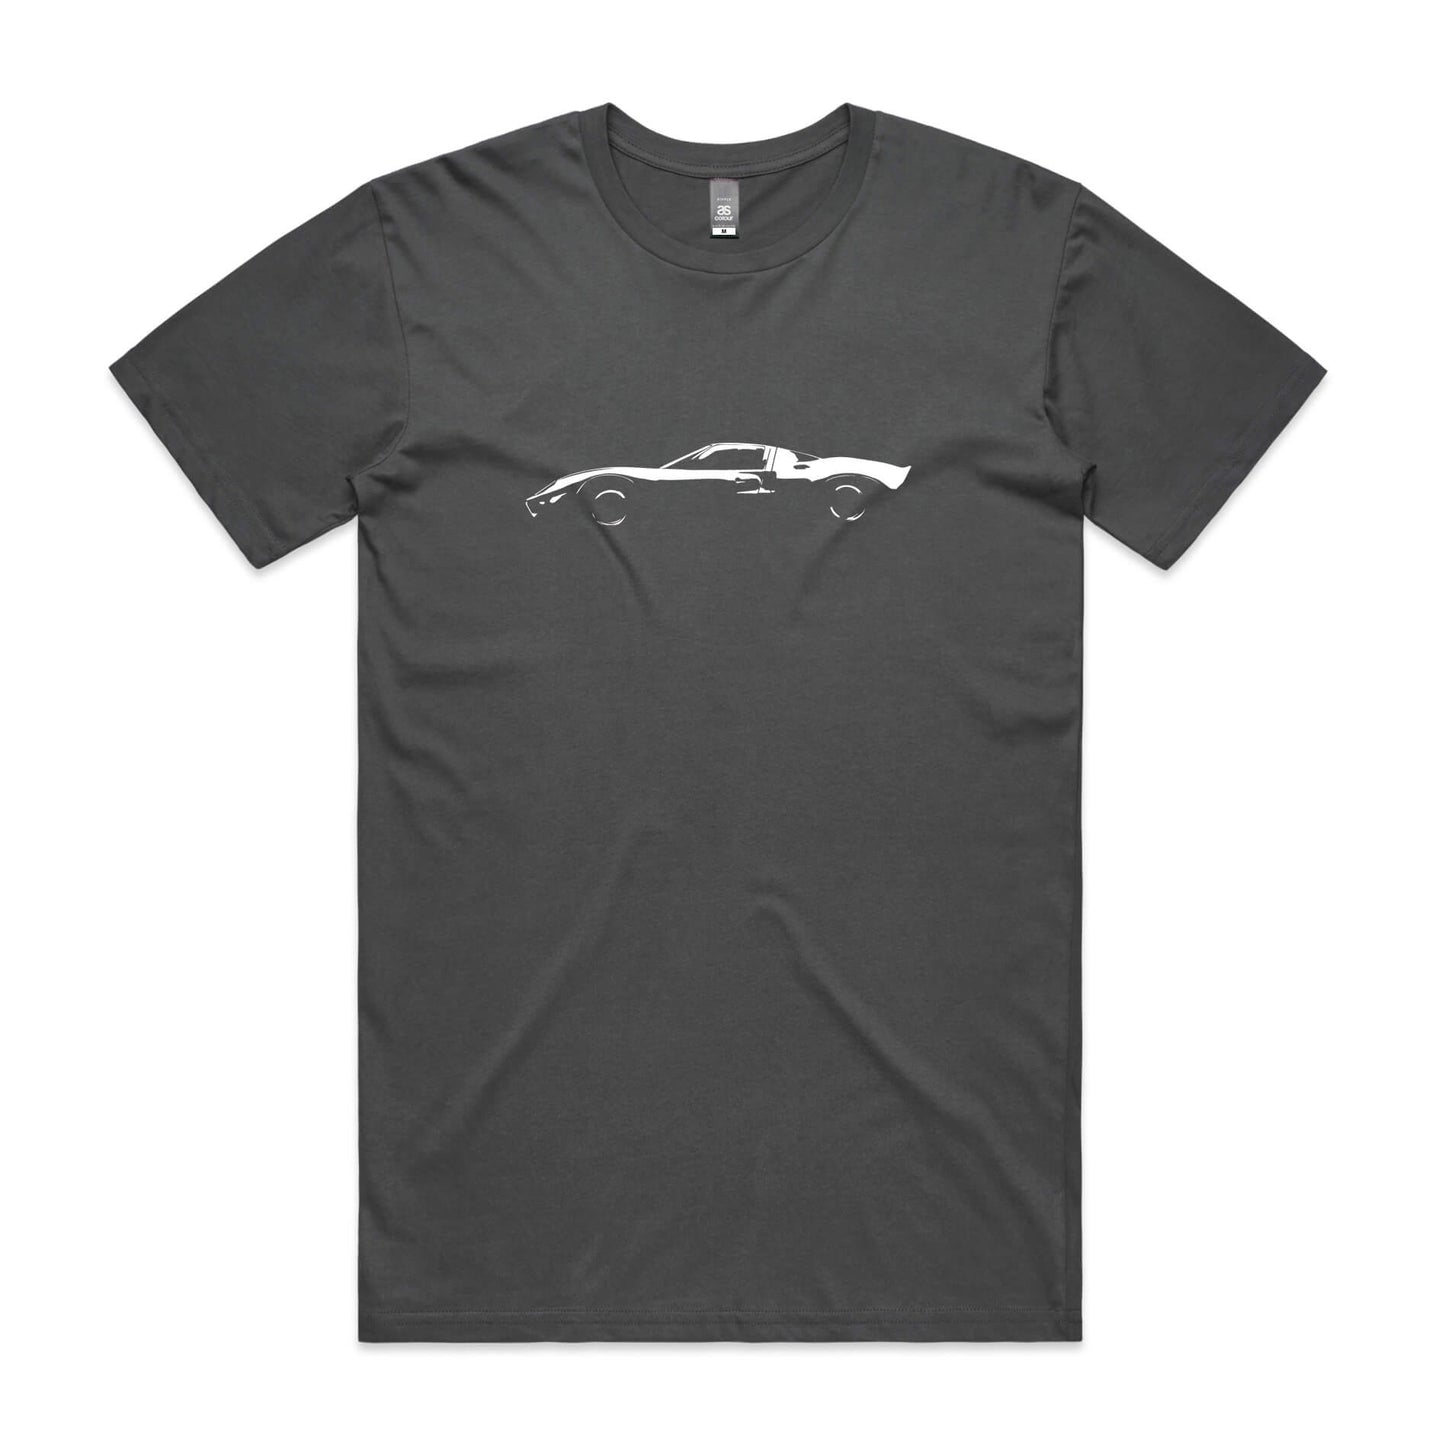 Ford GT40 t-shirt in charcoal grey with white car silhouette graphic